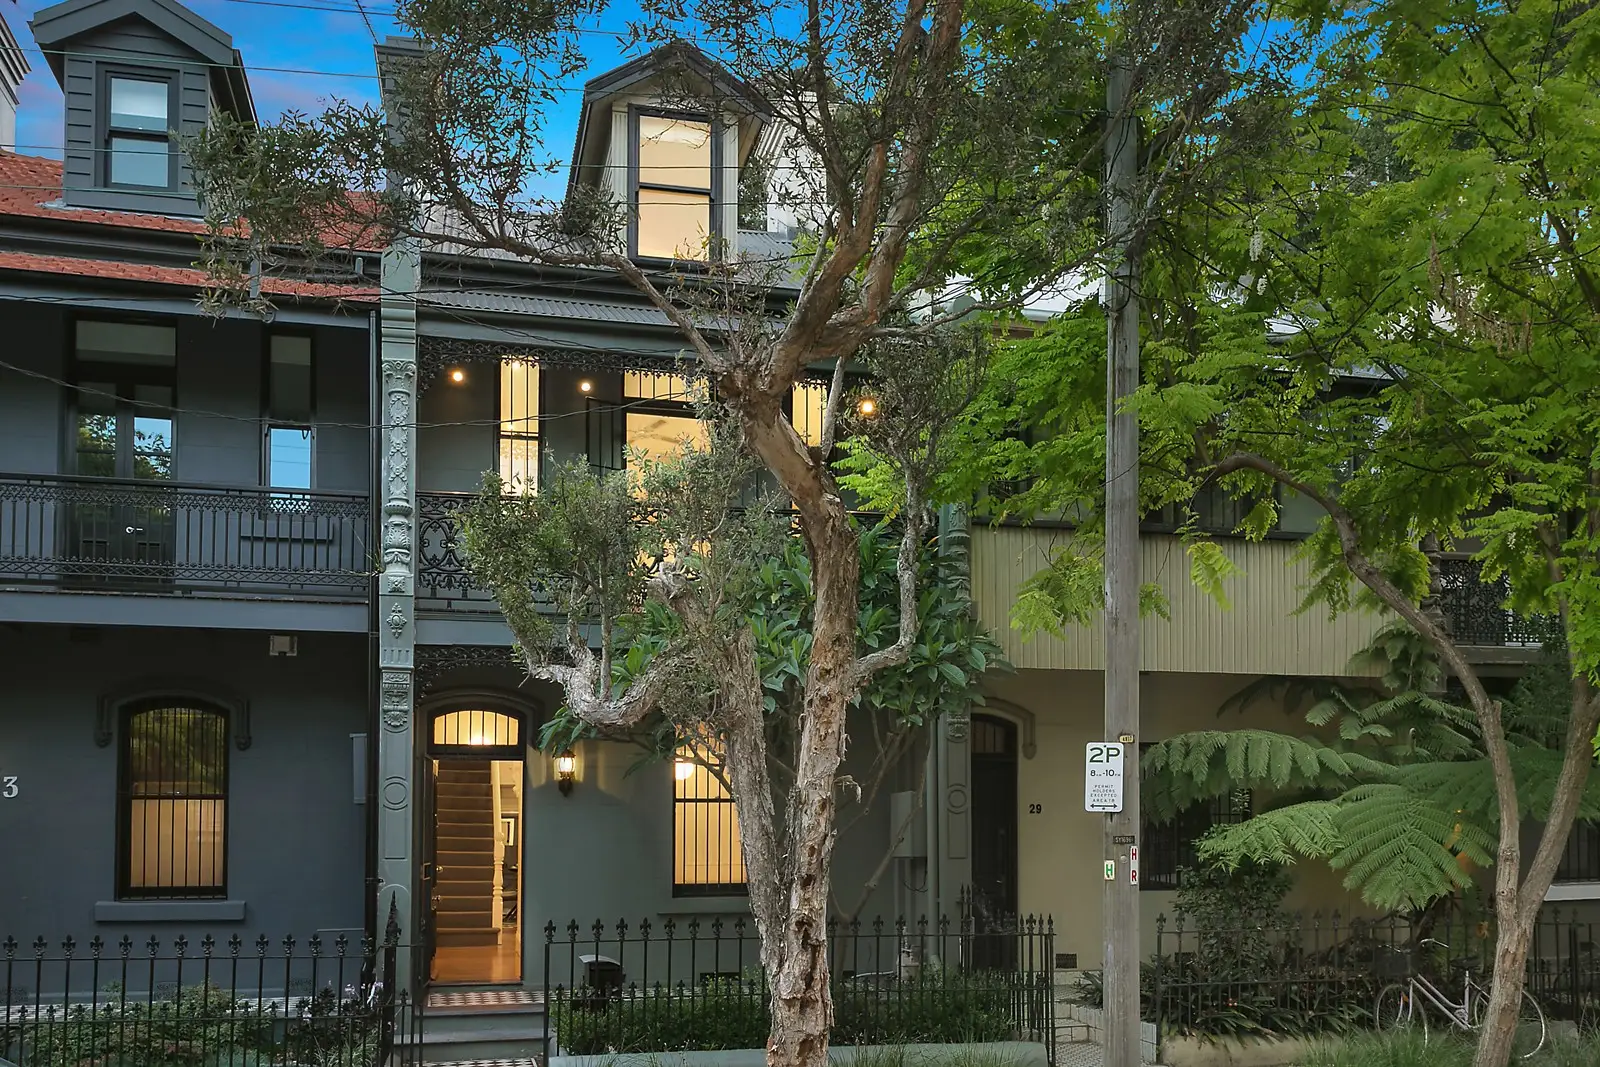 Photo #1: 31 Nobbs Street, Surry Hills - Sold by Sydney Sotheby's International Realty